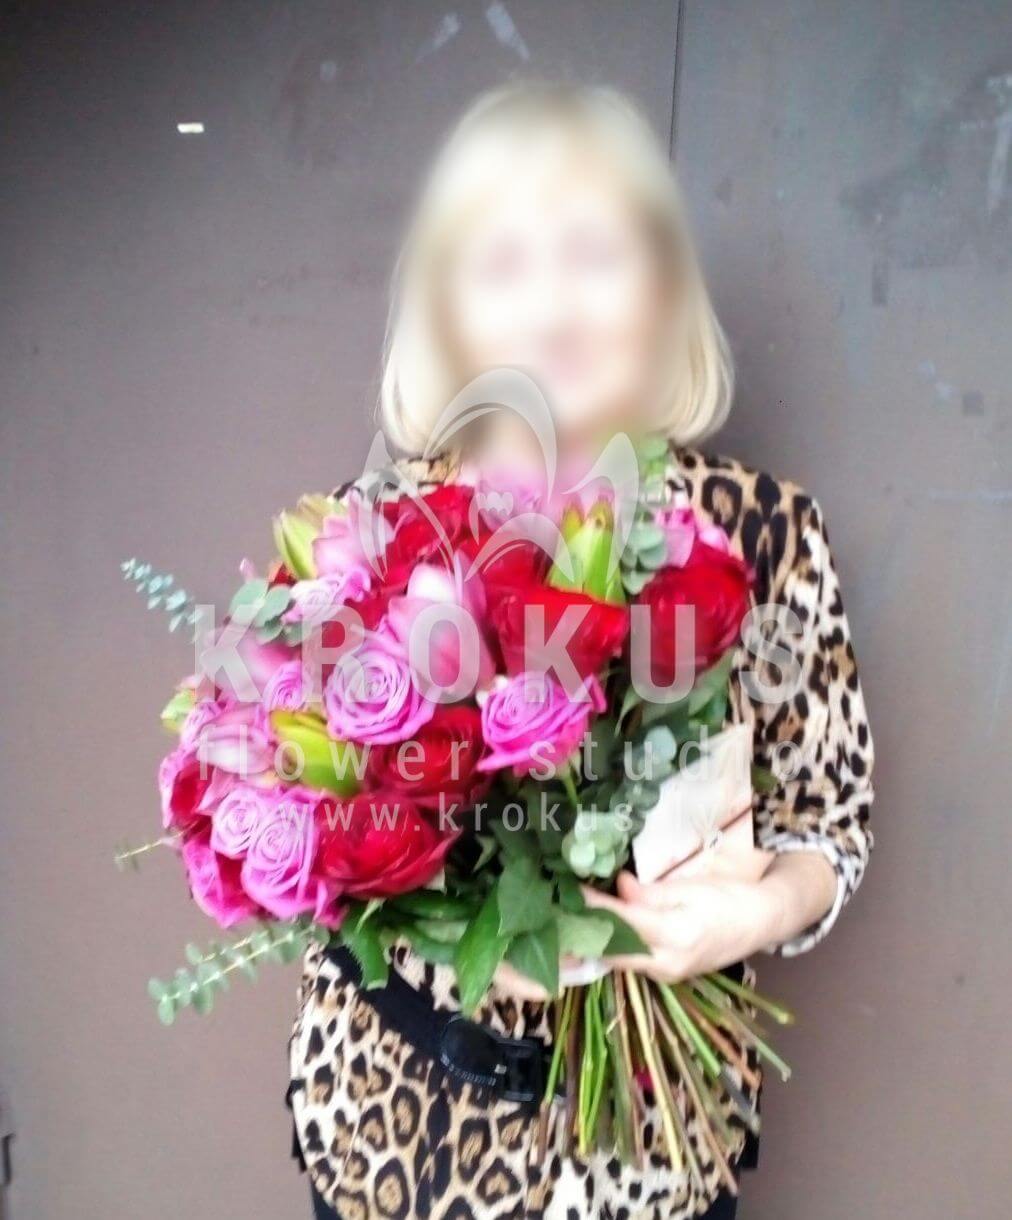 Deliver flowers to Latvia (pink rosesorchidsleucadendrongum treered roses)